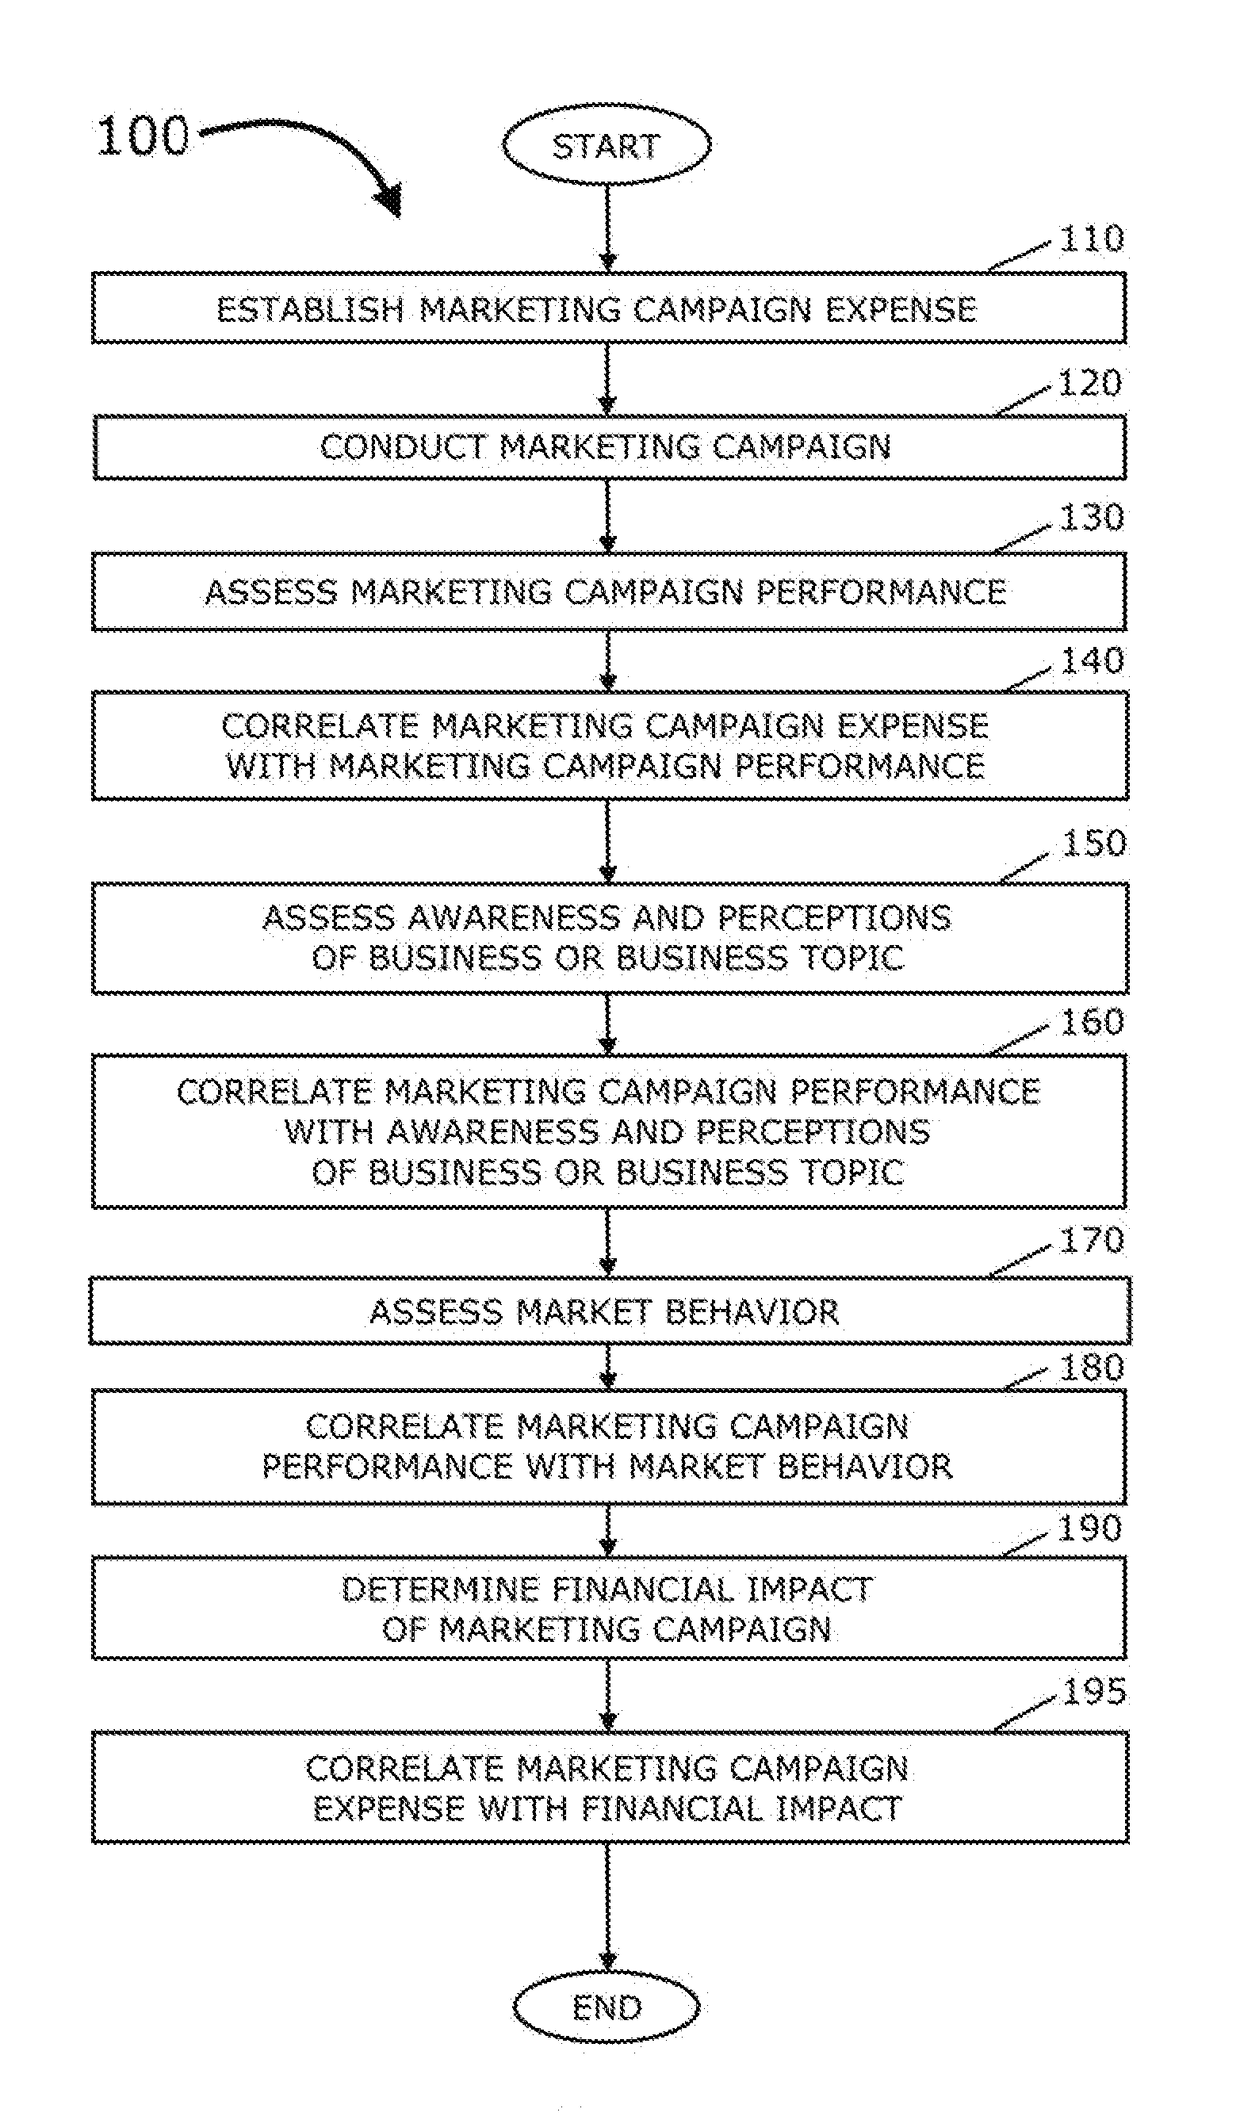 System and methods for connecting marketing investment to impact on business revenue, margin, and cash flow and for connecting and visualizing correlated data sets to describe a time-sequenced chain of cause and effect